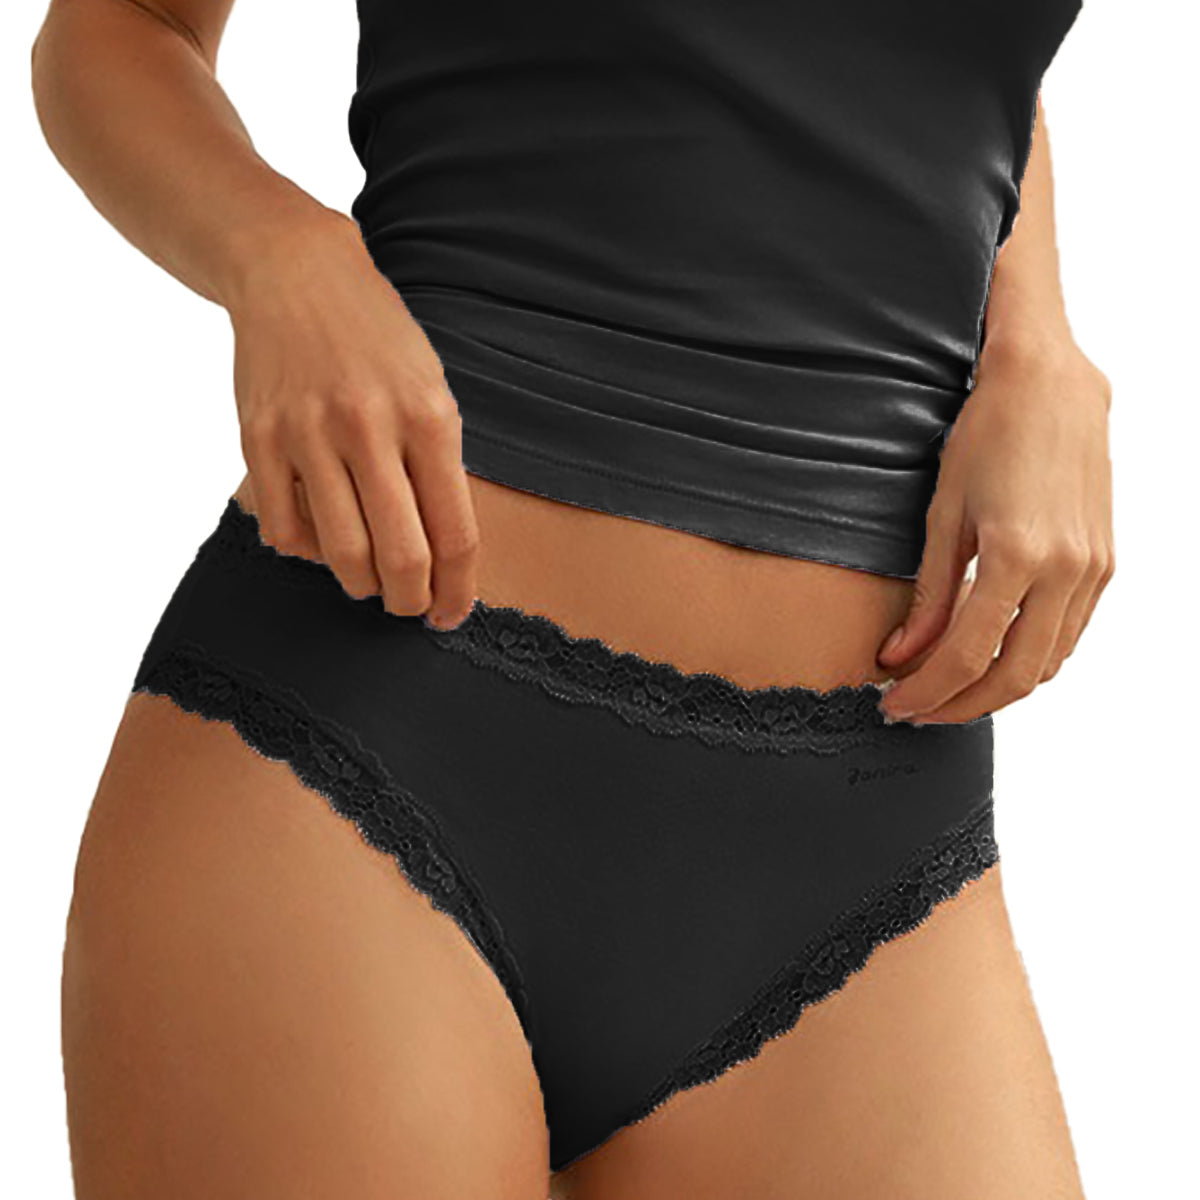 Yacht & Smith Womens Cotton Lycra Underwear Black Panty Briefs In Bulk, 95%  Cotton Soft Size X-Large - Samples - at 